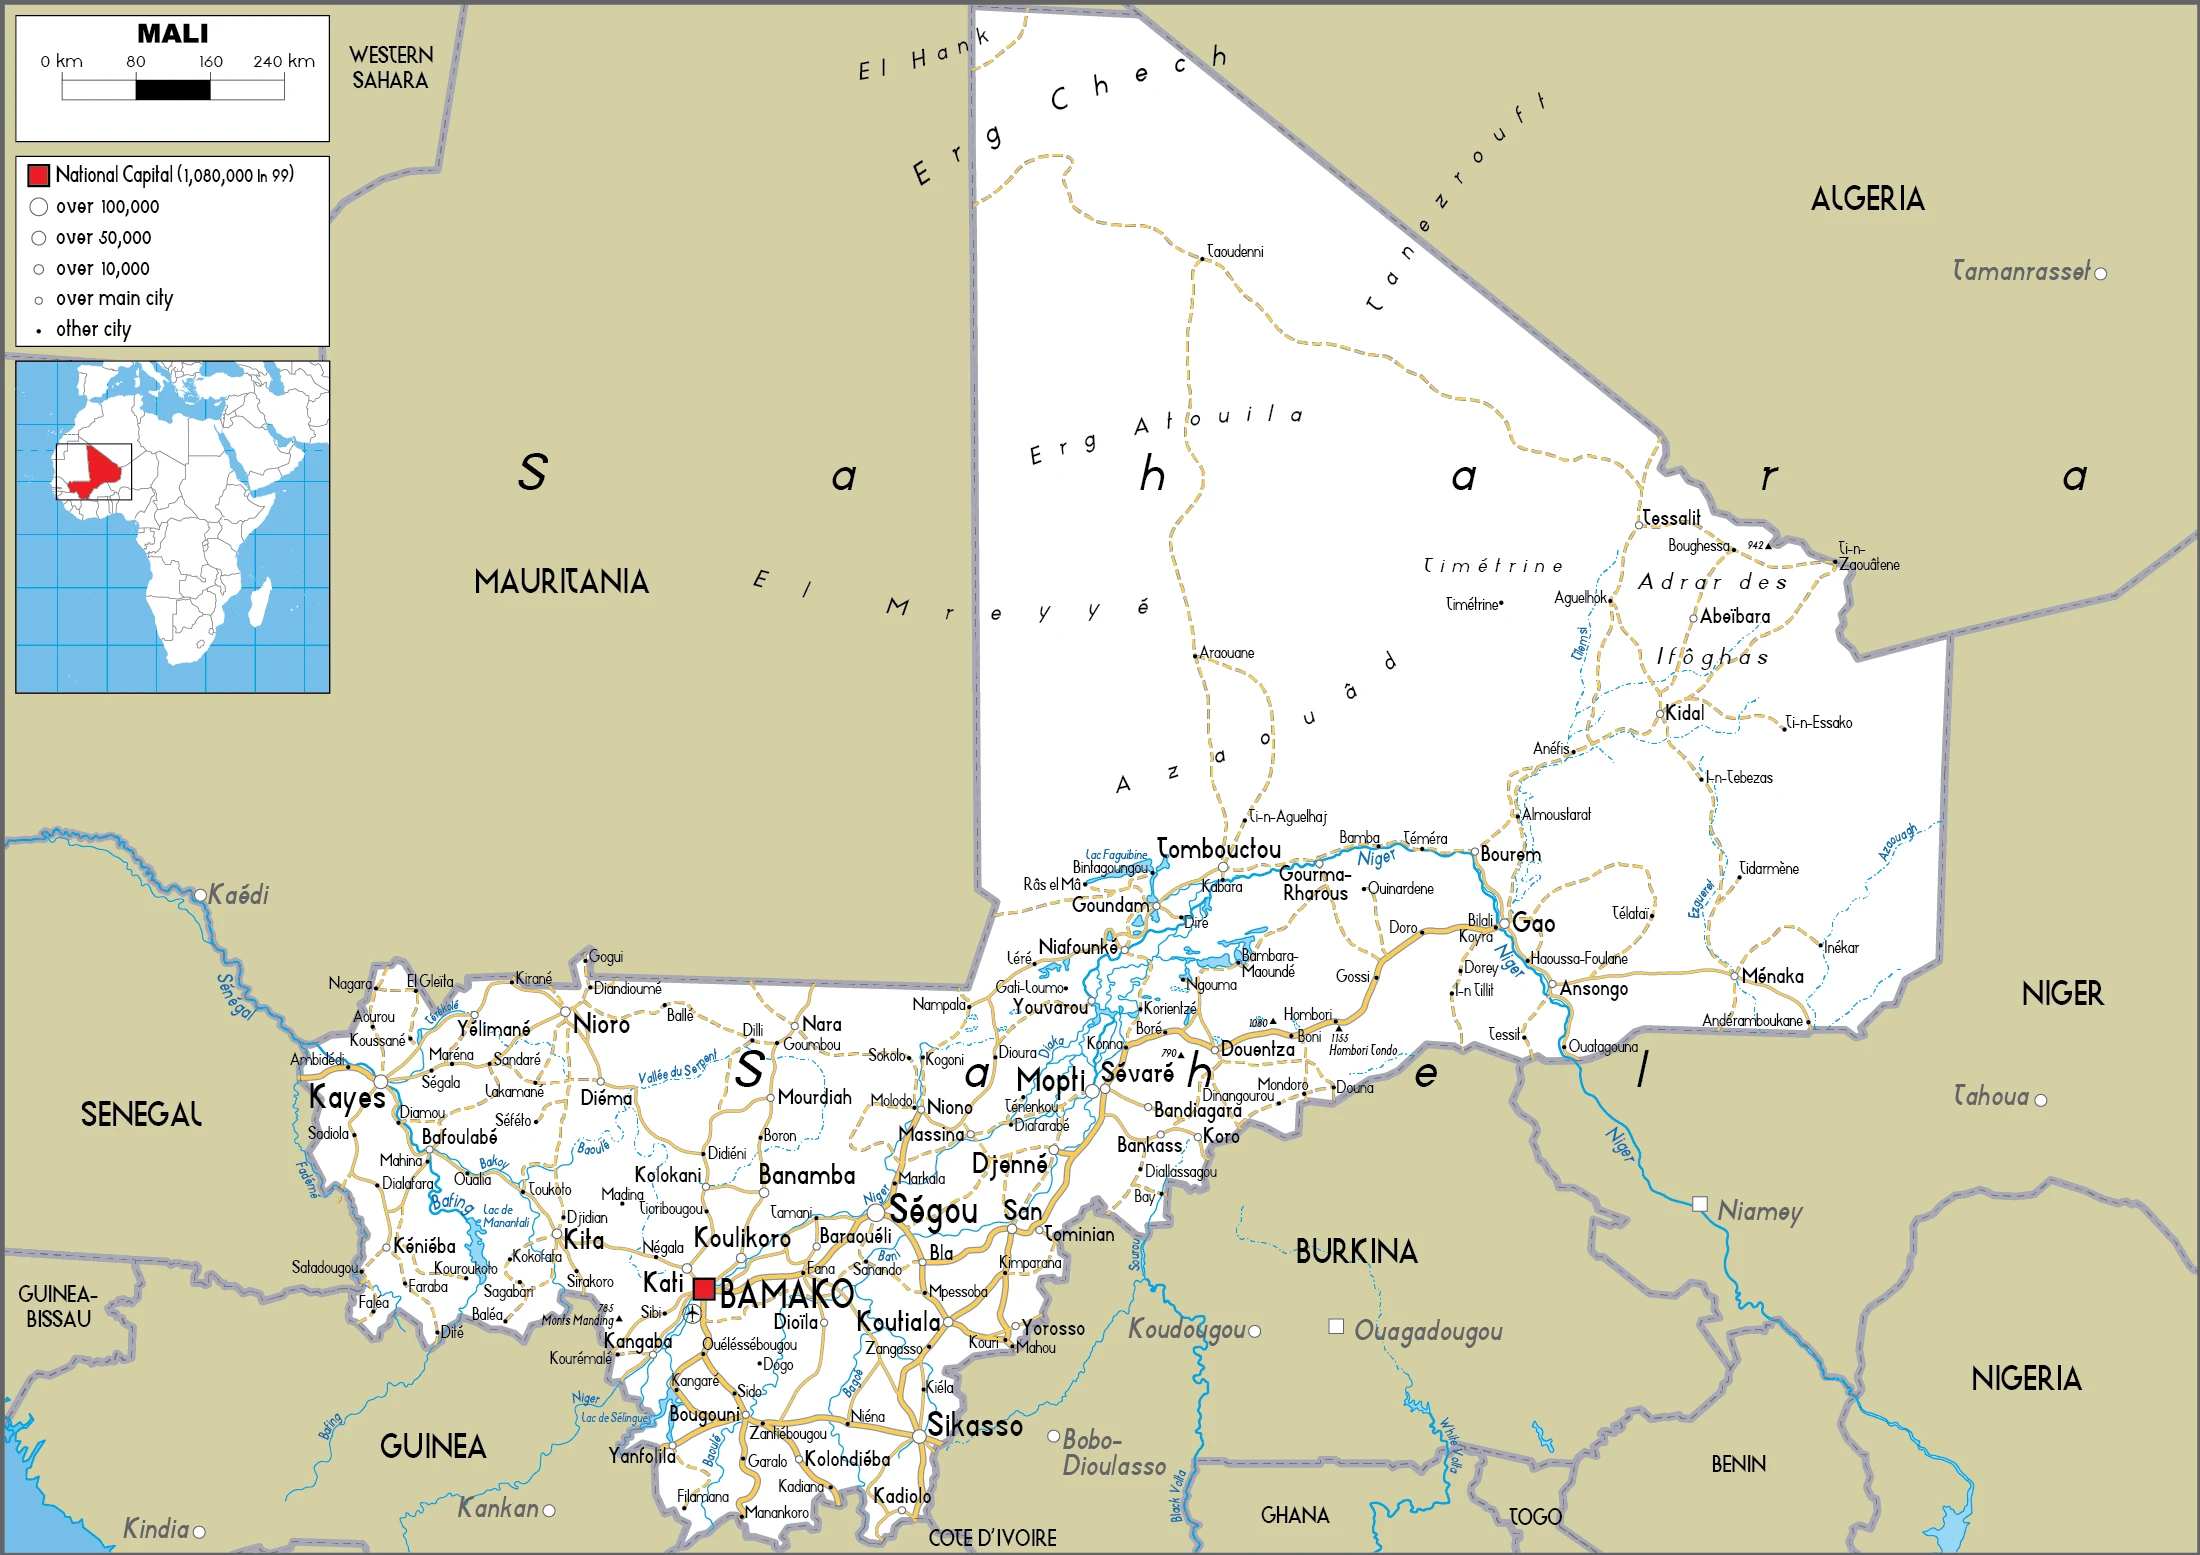 The route plan of the Malian roadways.